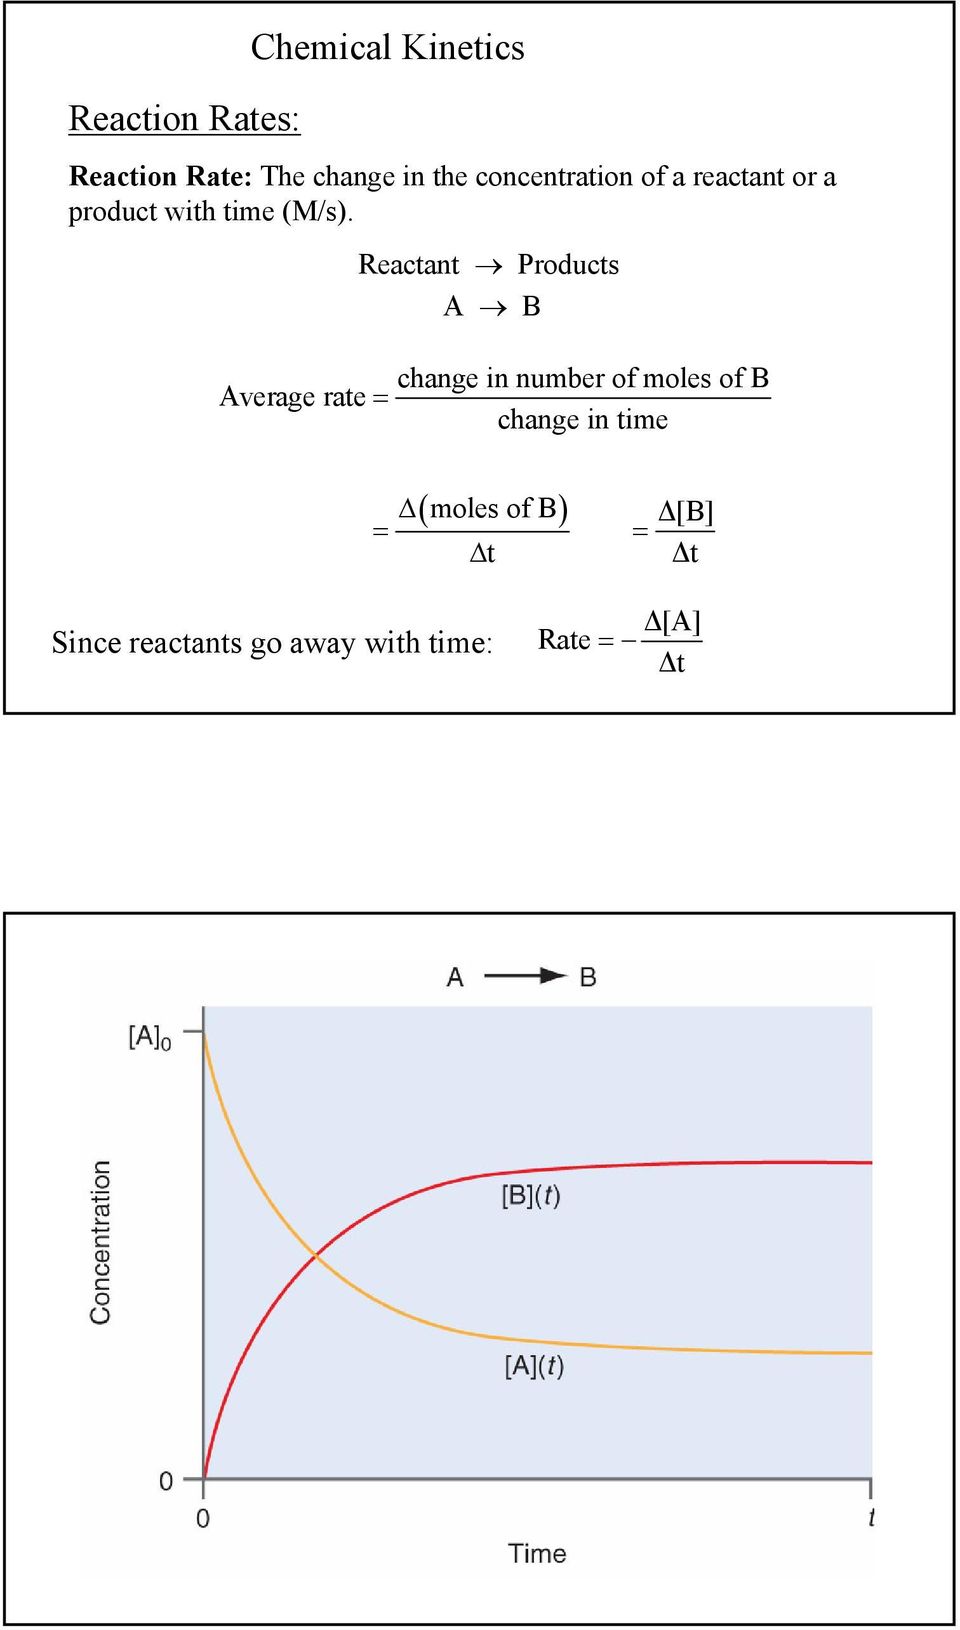 Reactant Products A B change in number of moles of B Average rate =